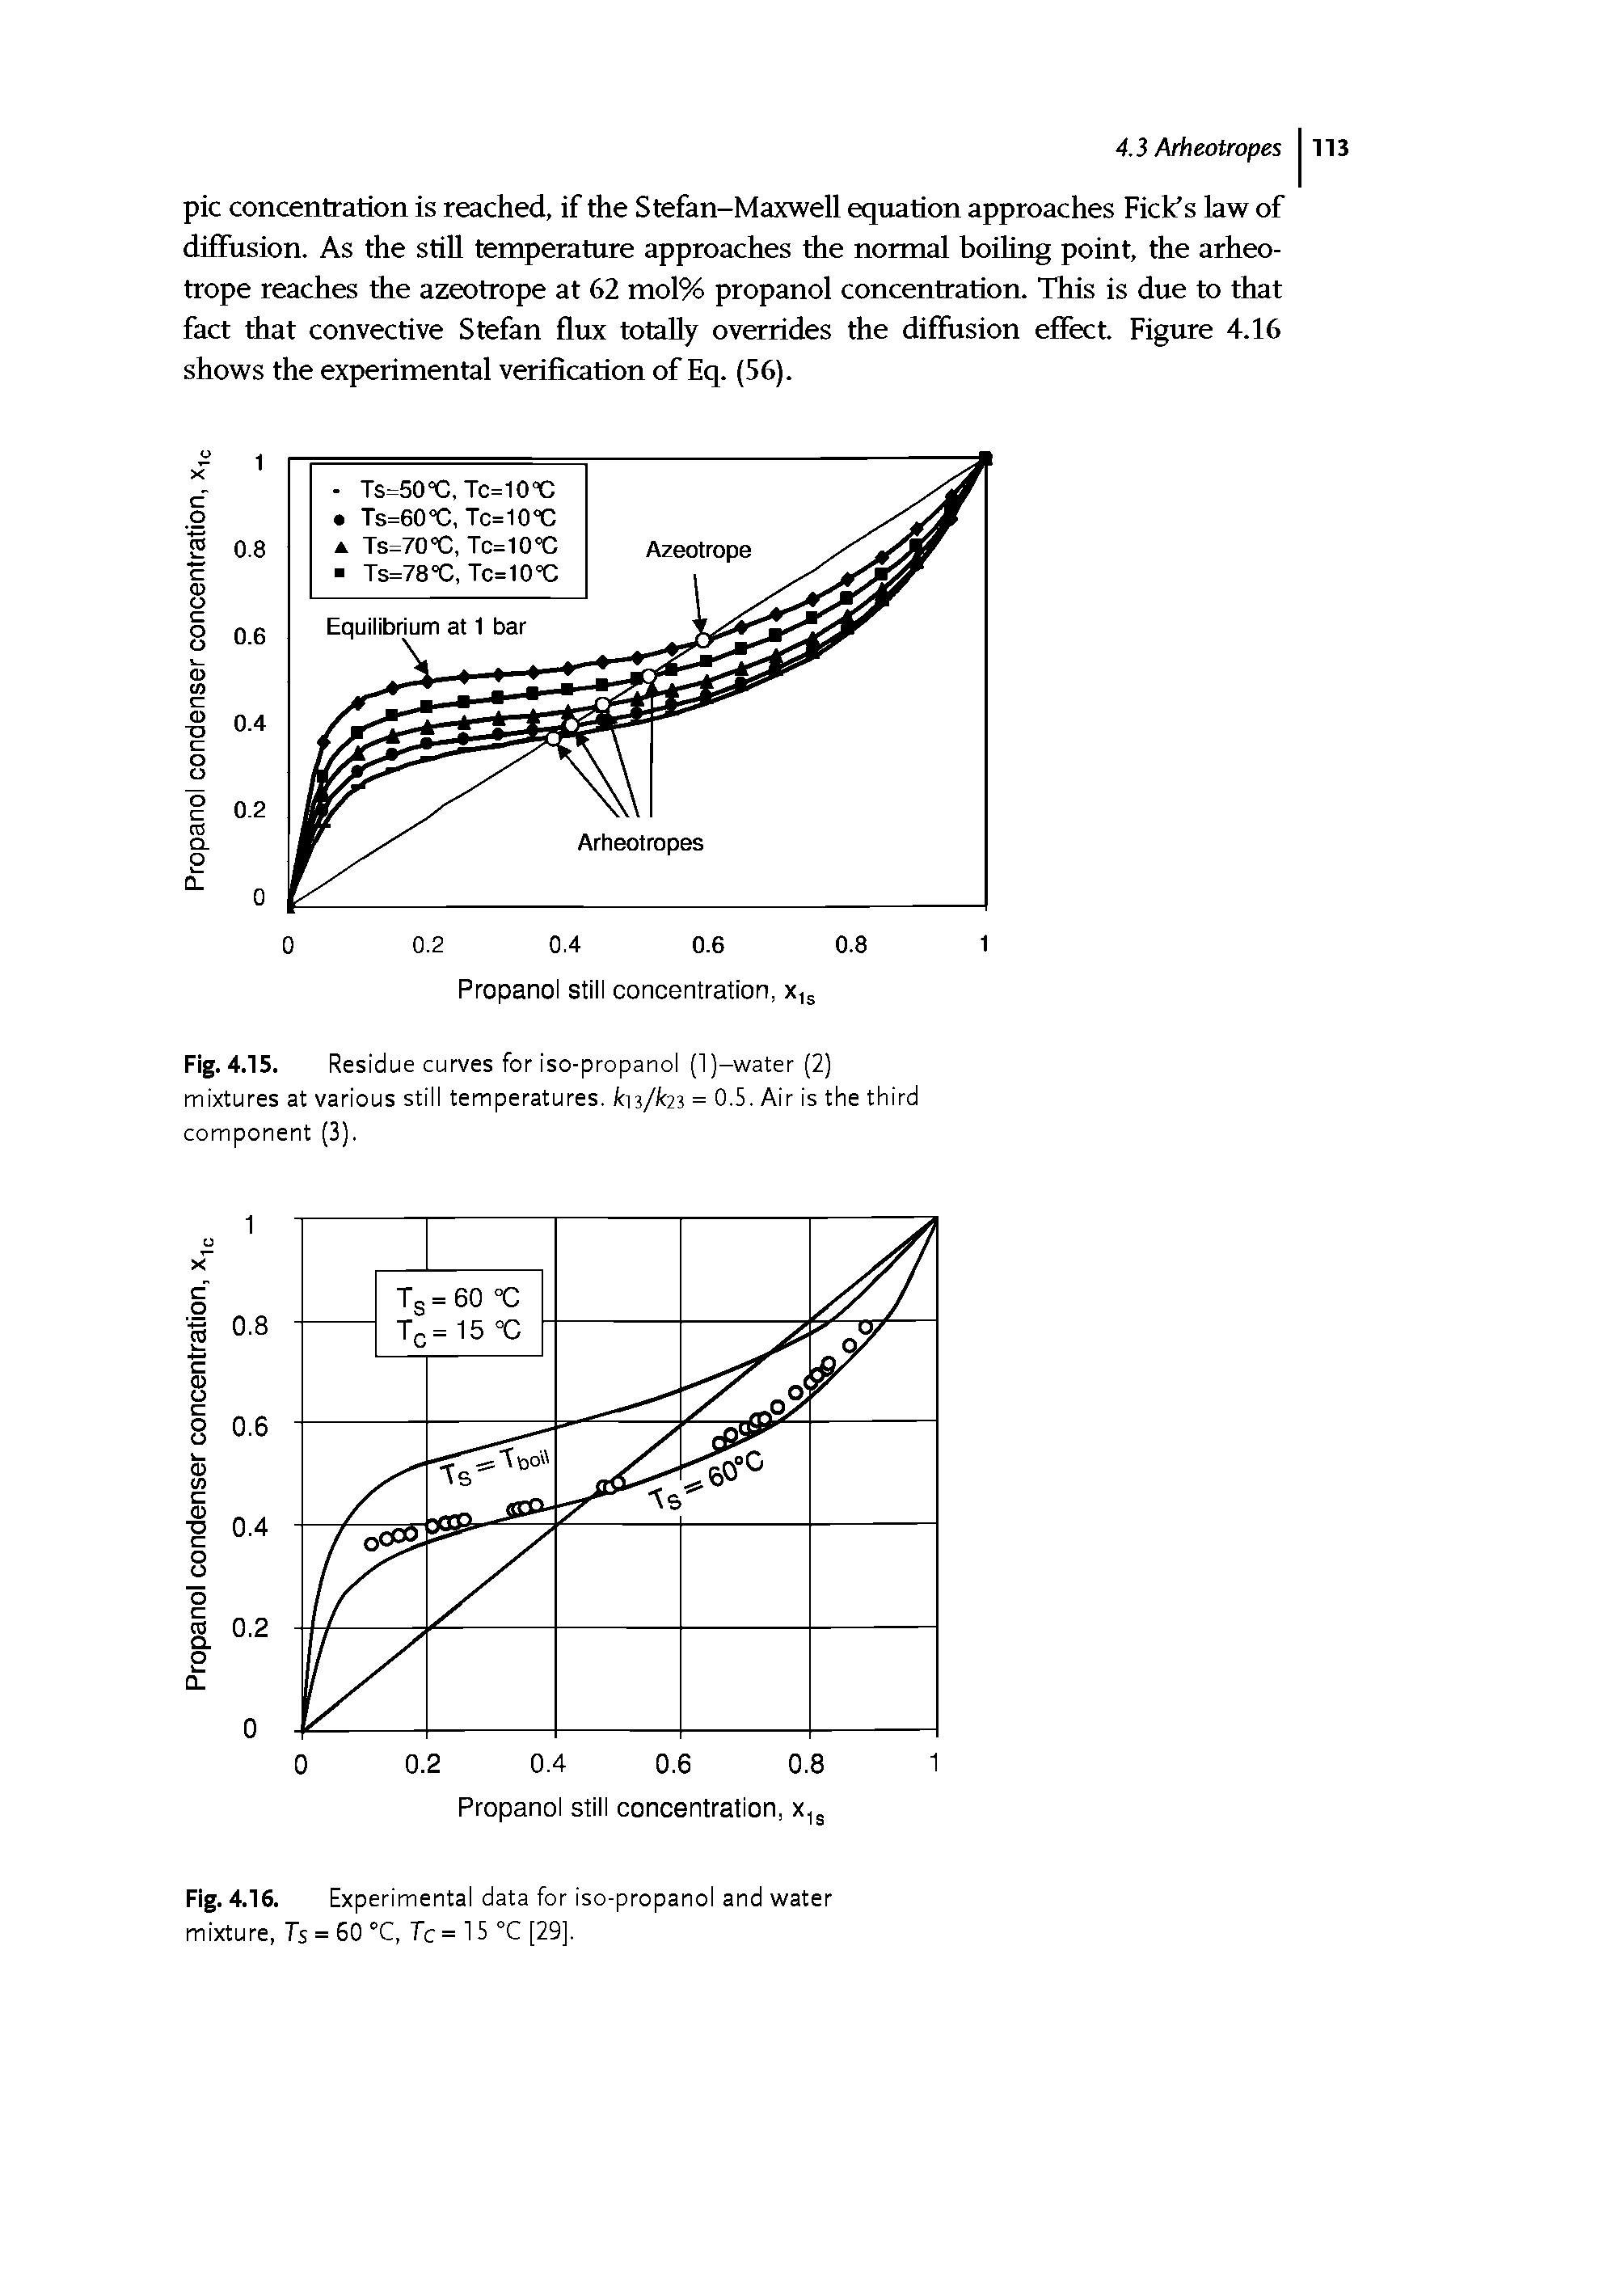 Fig. 4.15. Residue curves for iso-propanol (l)-water (2) mixtures at various still temperatures, kn3/te3 = 0.5. Air is the third component (3).